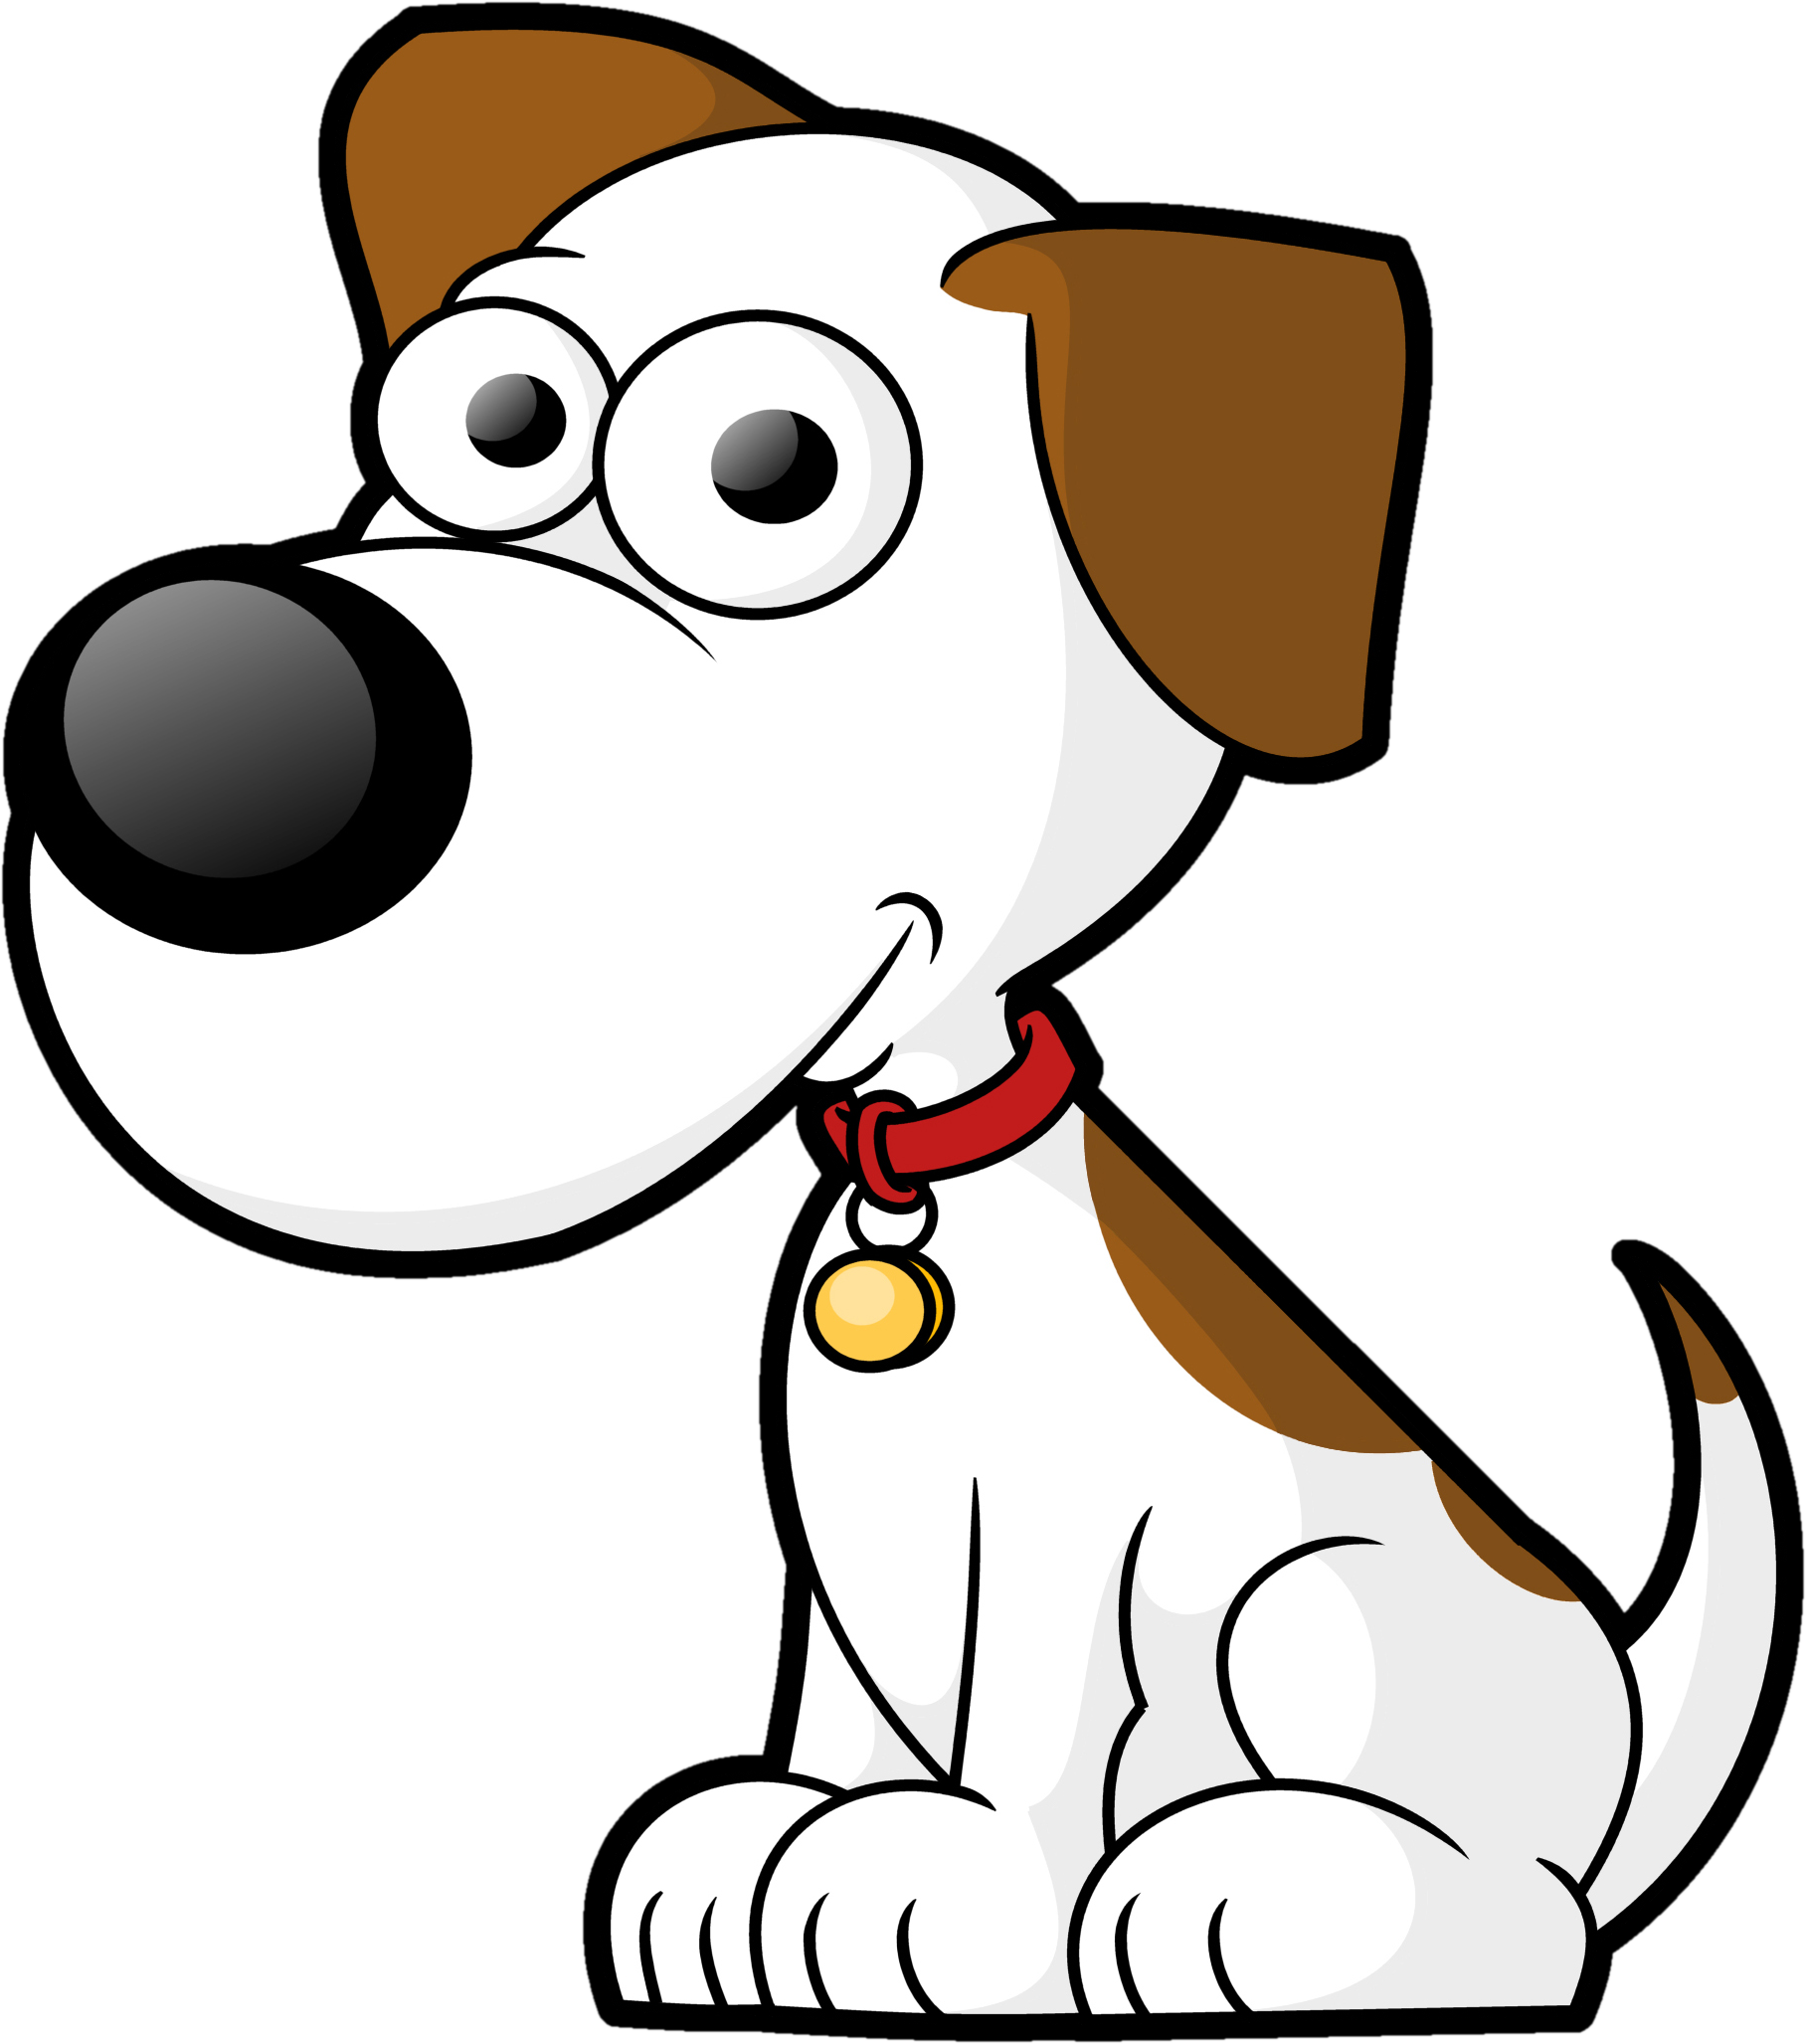 Funny Dog Cartoon Pictures | Free Download Clip Art | Free Clip ...